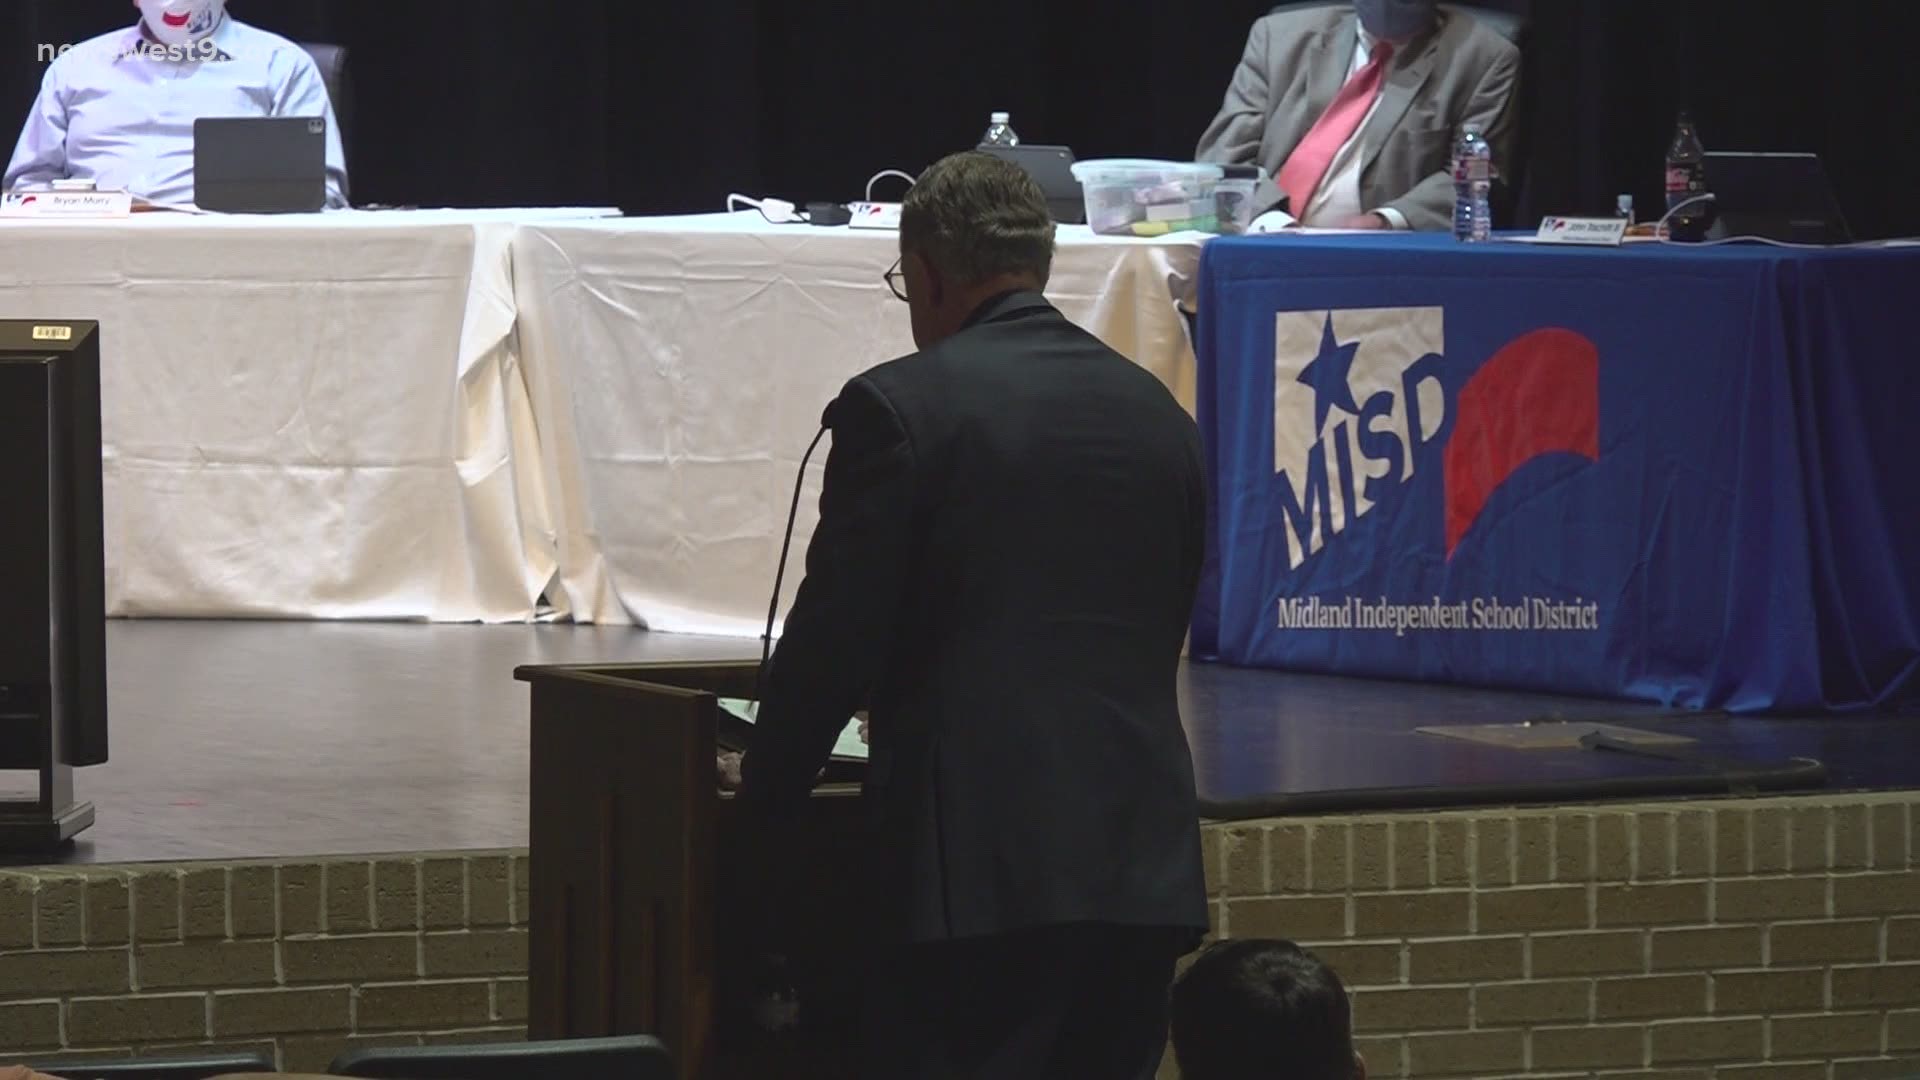 The Midland ISD school board has rejected the name recommendation of "Legacy of Equality and Excellence" instead voted in favor of "Legacy High School".